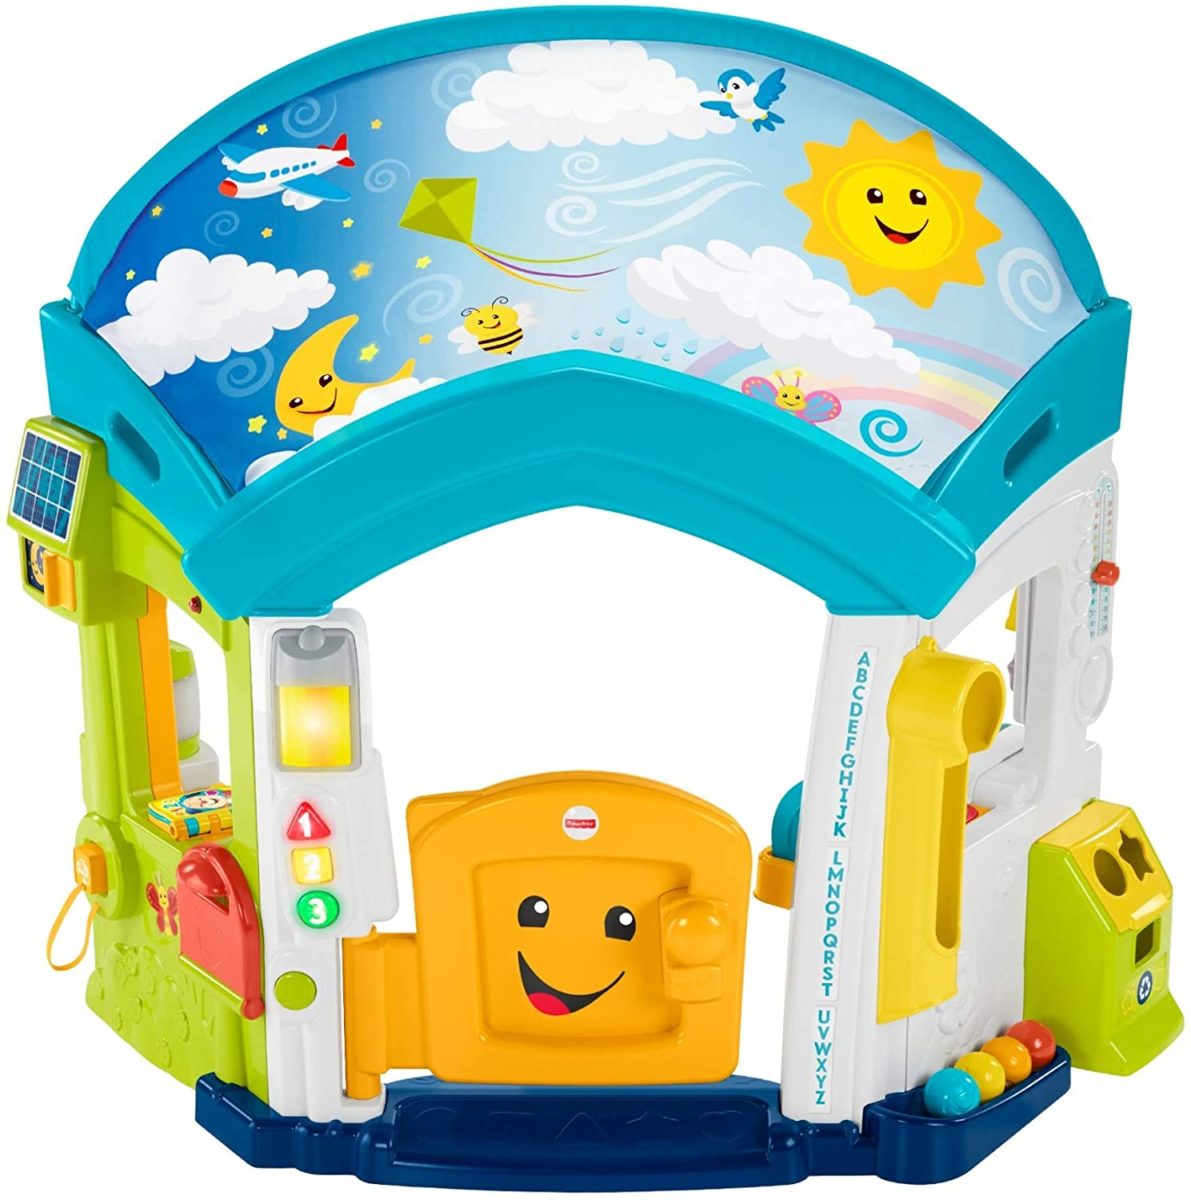 Top Quality Fisher-Price Toys That Come Highly-Rated, Educational, and Entertaining That You Can Buy for Your Little Ones Right Now on Amazon